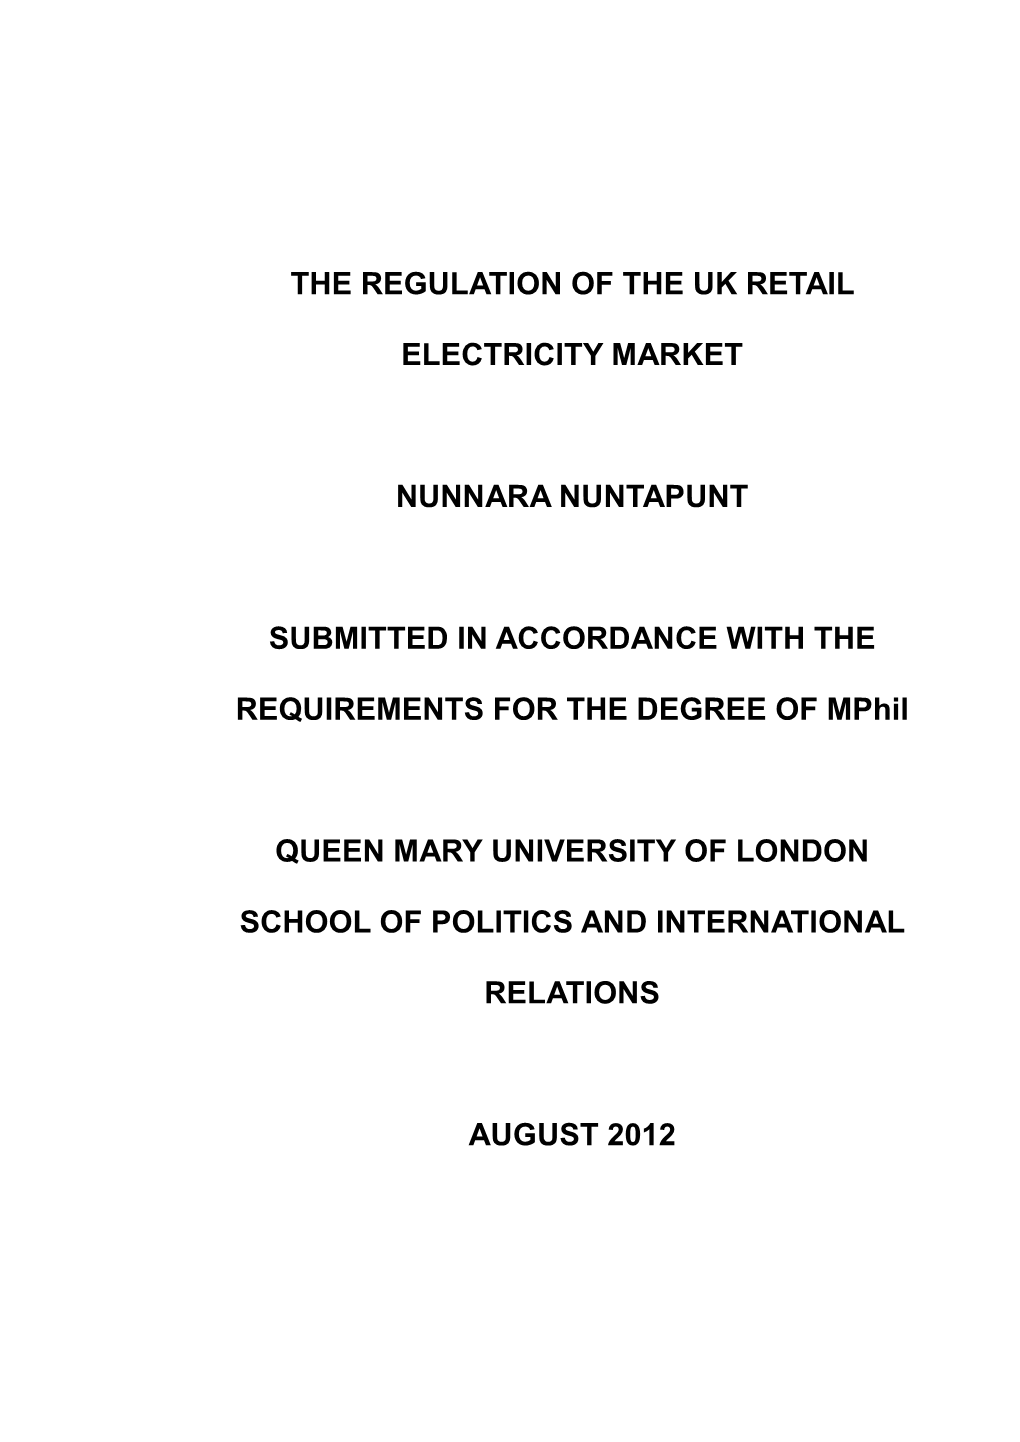 The Regulation of the Uk Retail